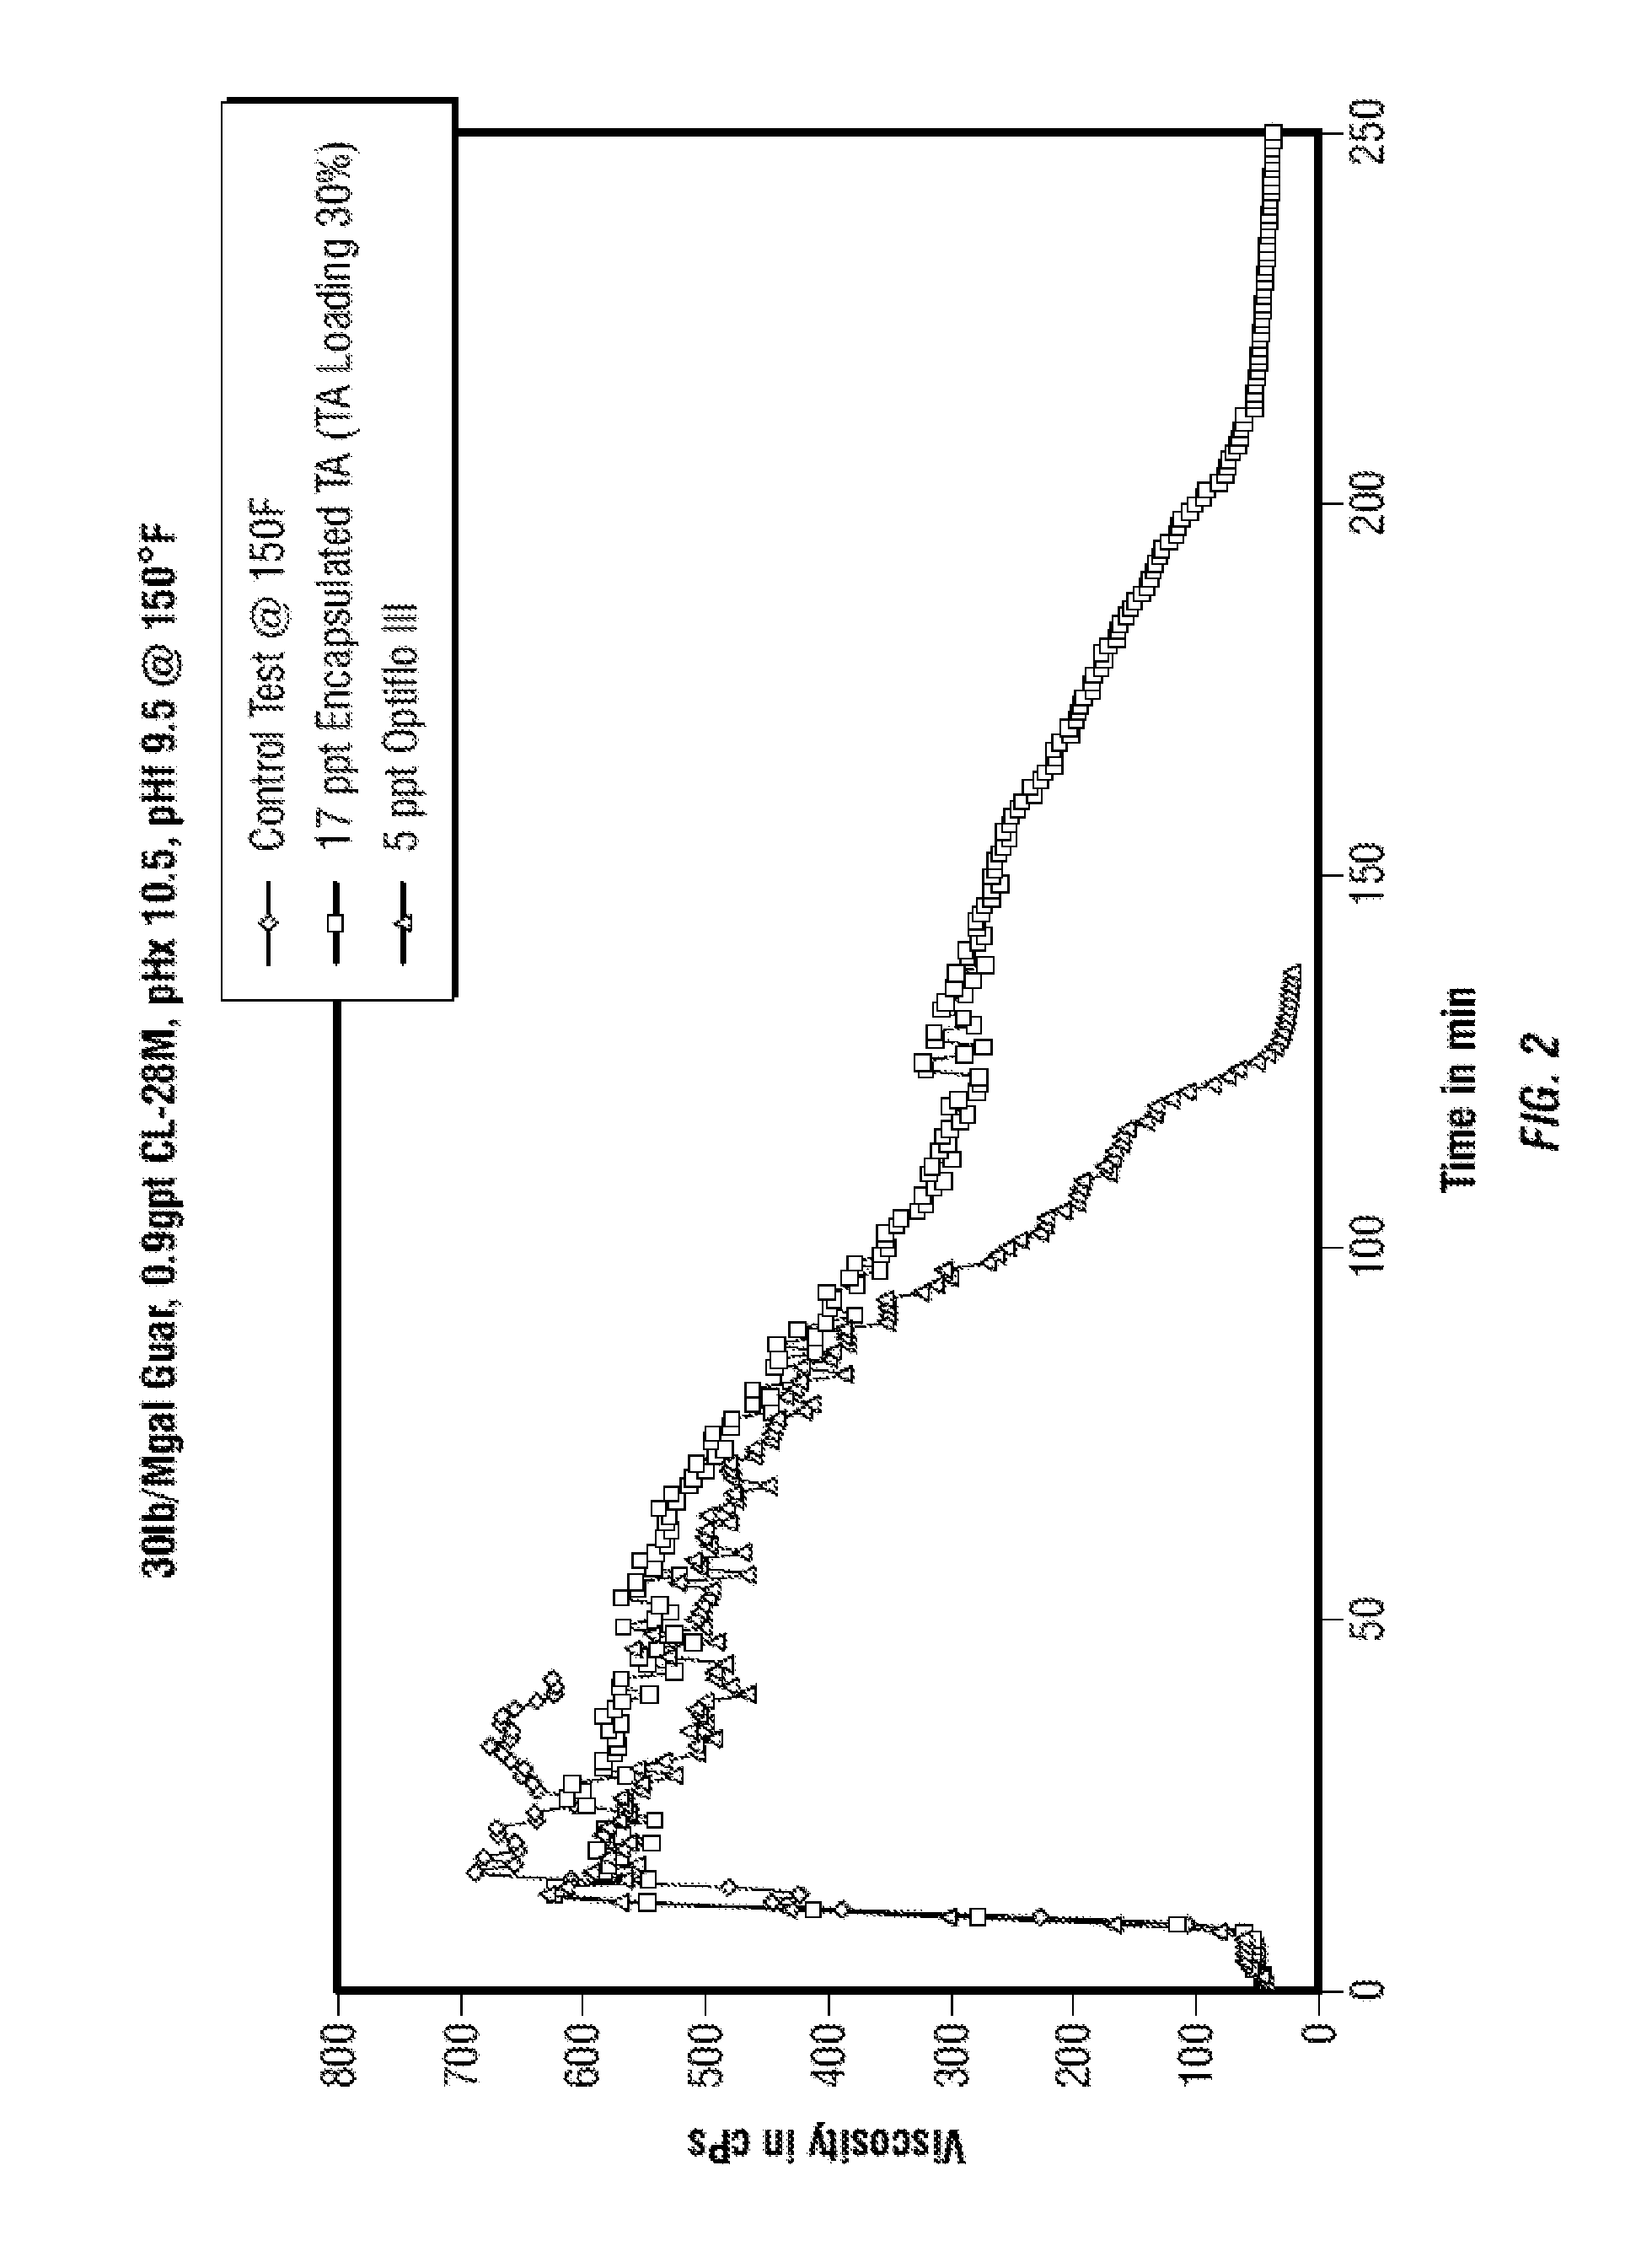 Method for the Removal or Suppression of Interfering Metal Ions Using Environmentally Friendly Competitive Binders